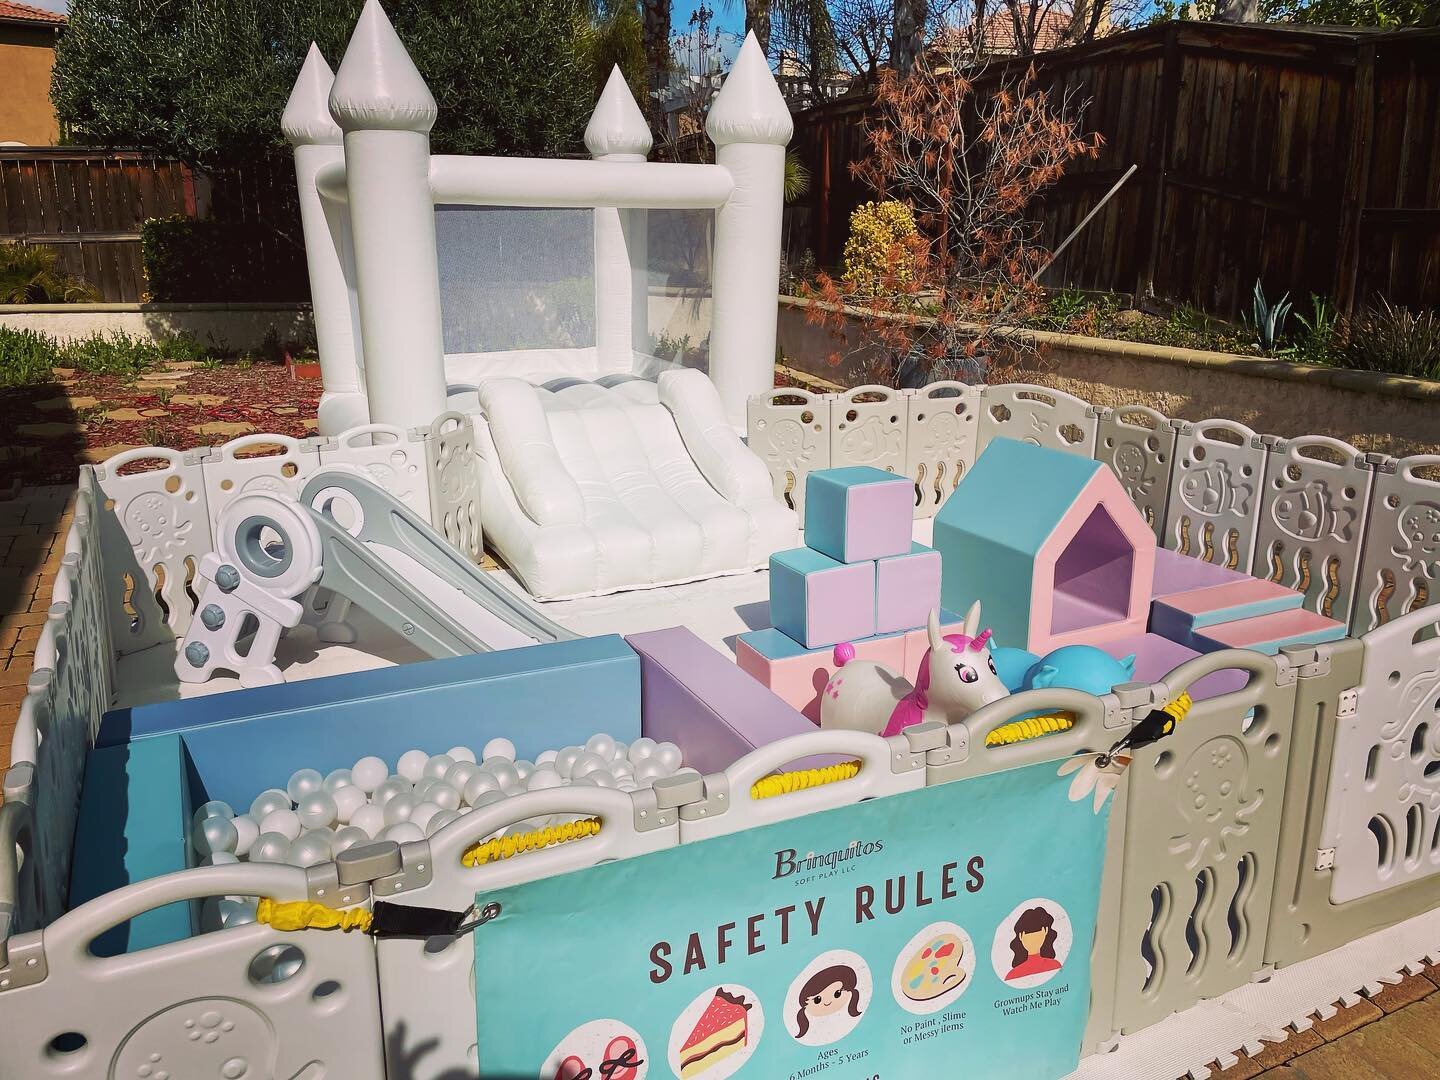 Pastel softplay pairs perfectly with our Mini Castle! 💕 

#sundayrental #softplay #softplayrental #softplaymurrieta #softplayparty #firstbirthdayparty #onesweetbirthdaygirl